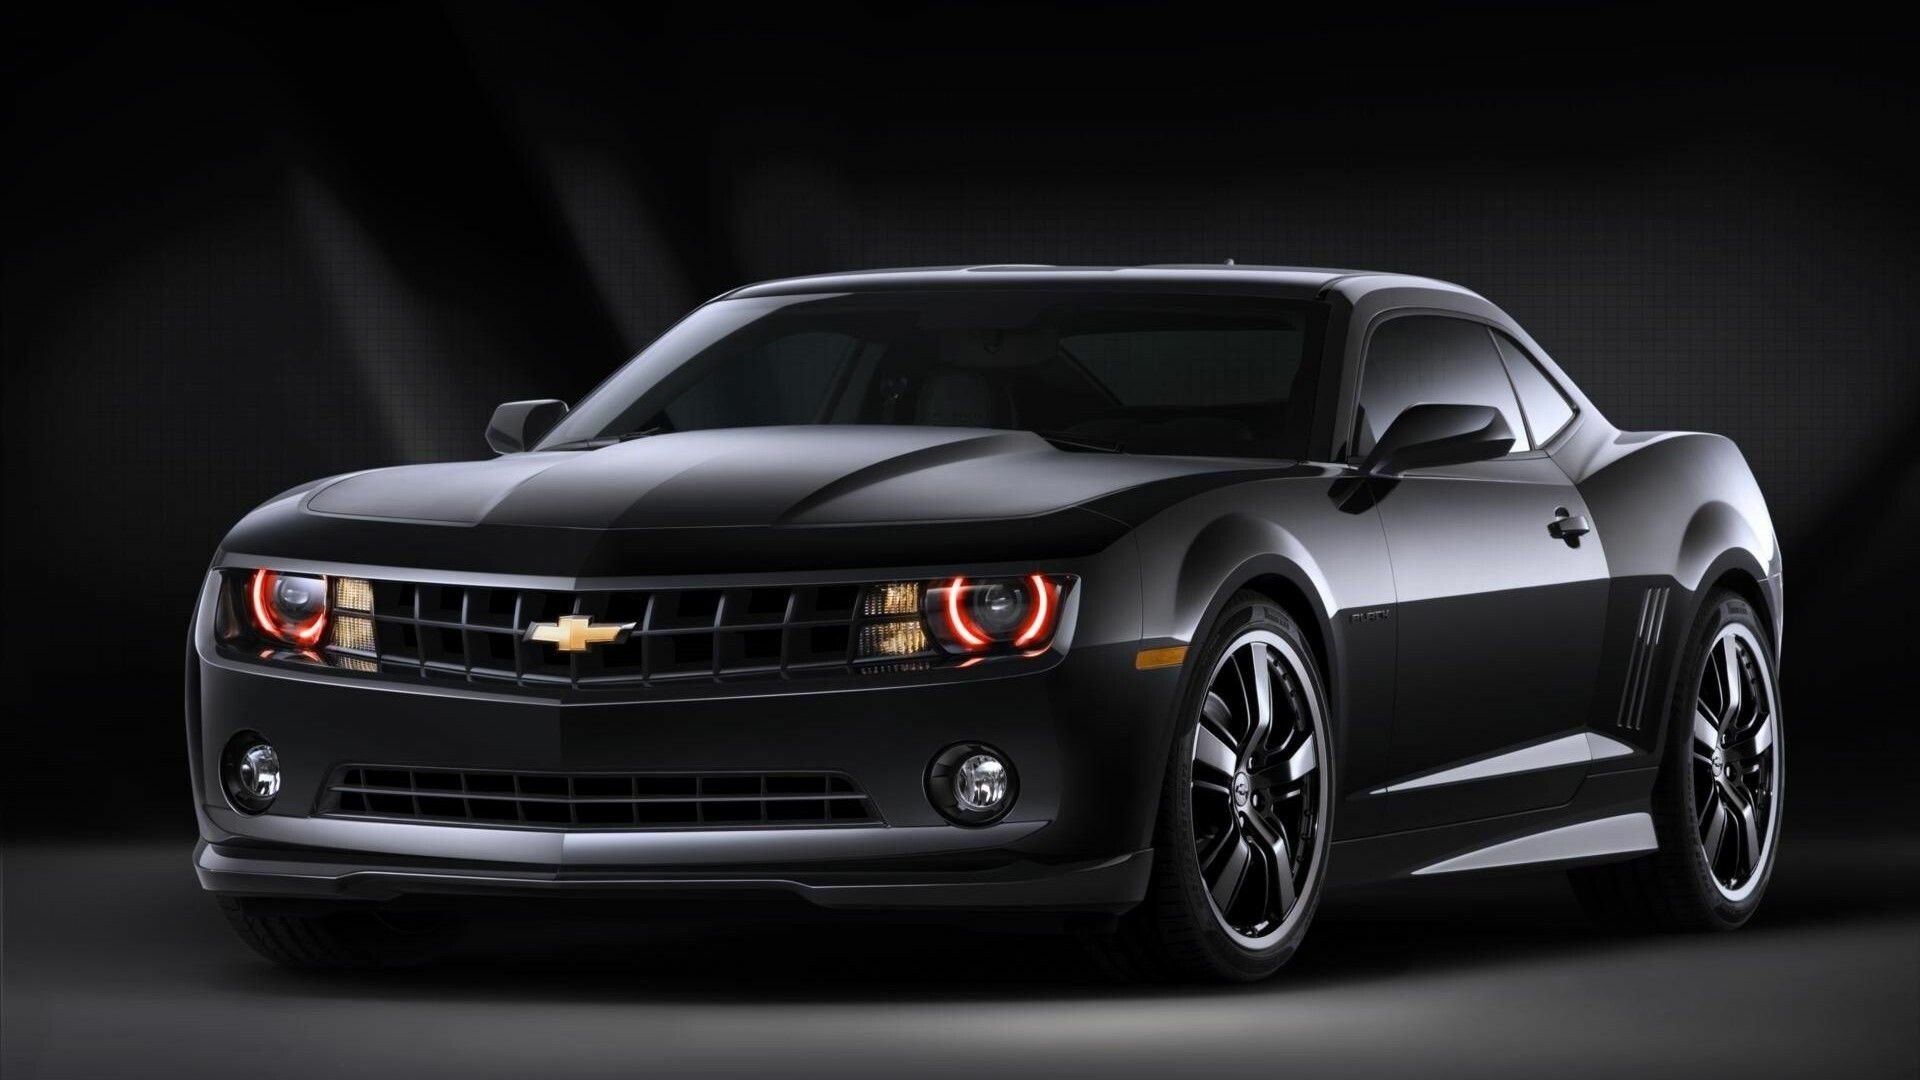 Chevrolet: The automaker provides one of the most versatile lineups available. 1920x1080 Full HD Wallpaper.